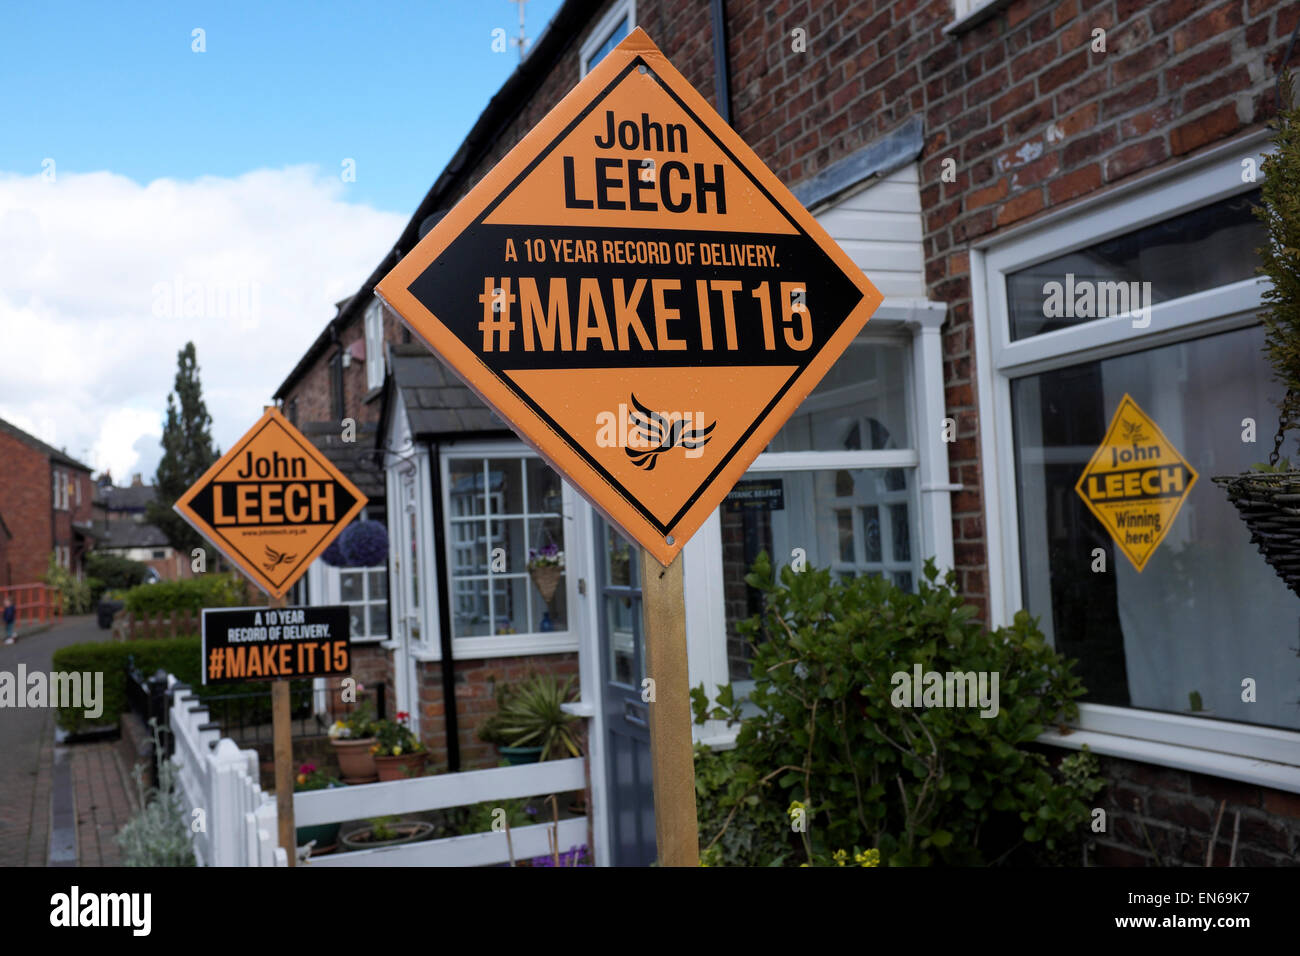 Manchester, UK. 29th April, 2015. A house in Didsbury shows strong support for the LibDems. LibDems won in 2005 and 2015, but it is expected to be close between them and Labour. The Conservative are considered to have no chance of winning the seat. General Election Strong Support for LibDem in Manchester Withington. Credit:  John Fryer/Alamy Live News Stock Photo